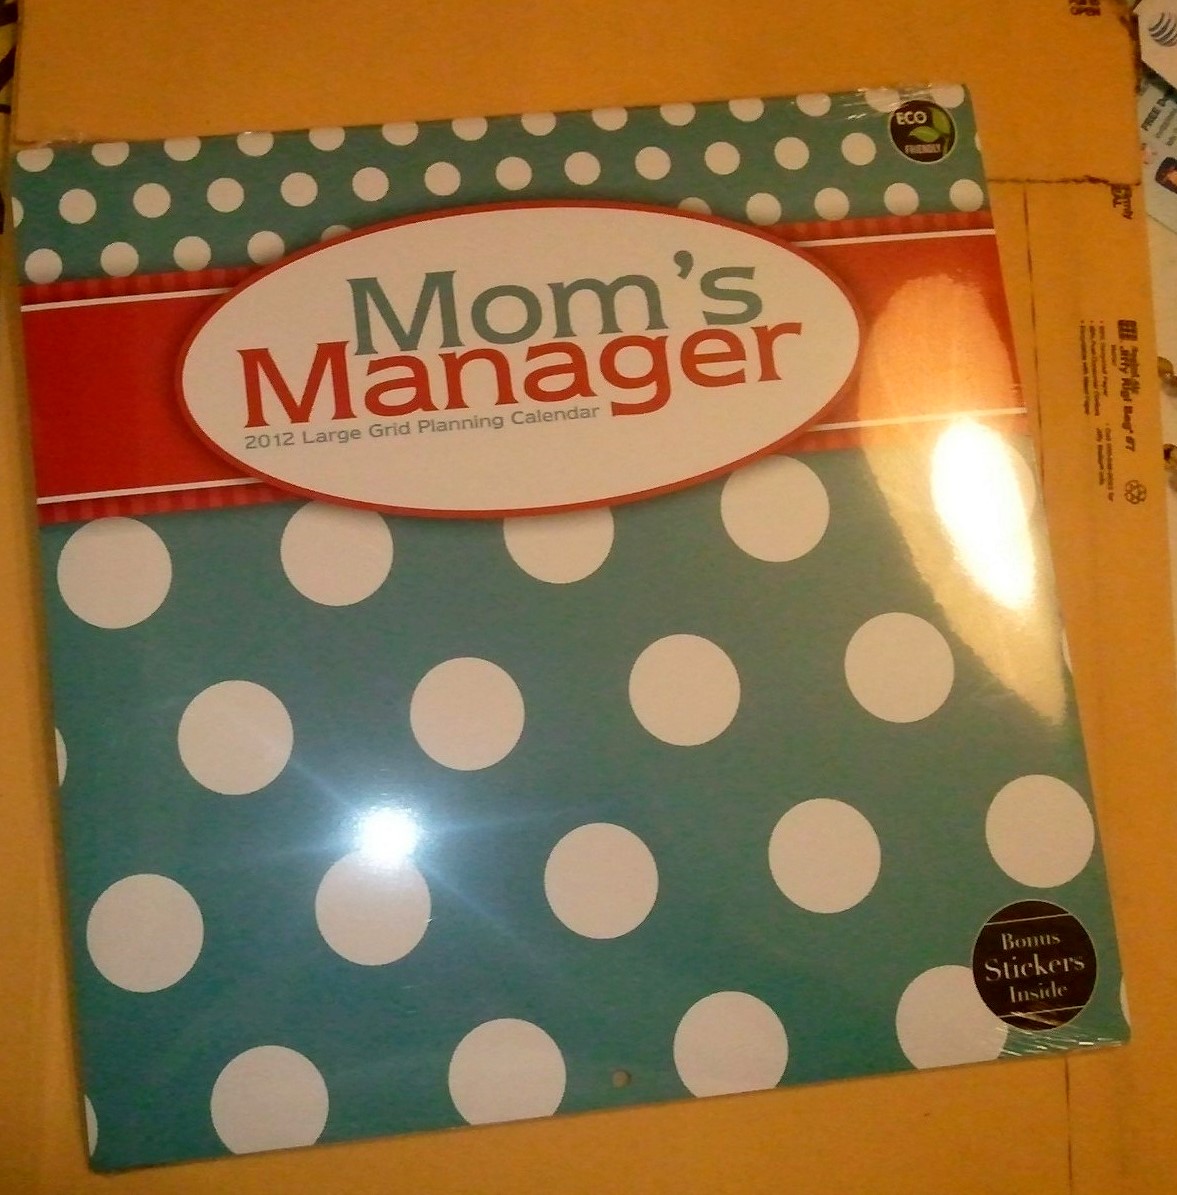 hands-and-hearts-more-than-full-tf-publishing-mom-s-manager-calendar-review